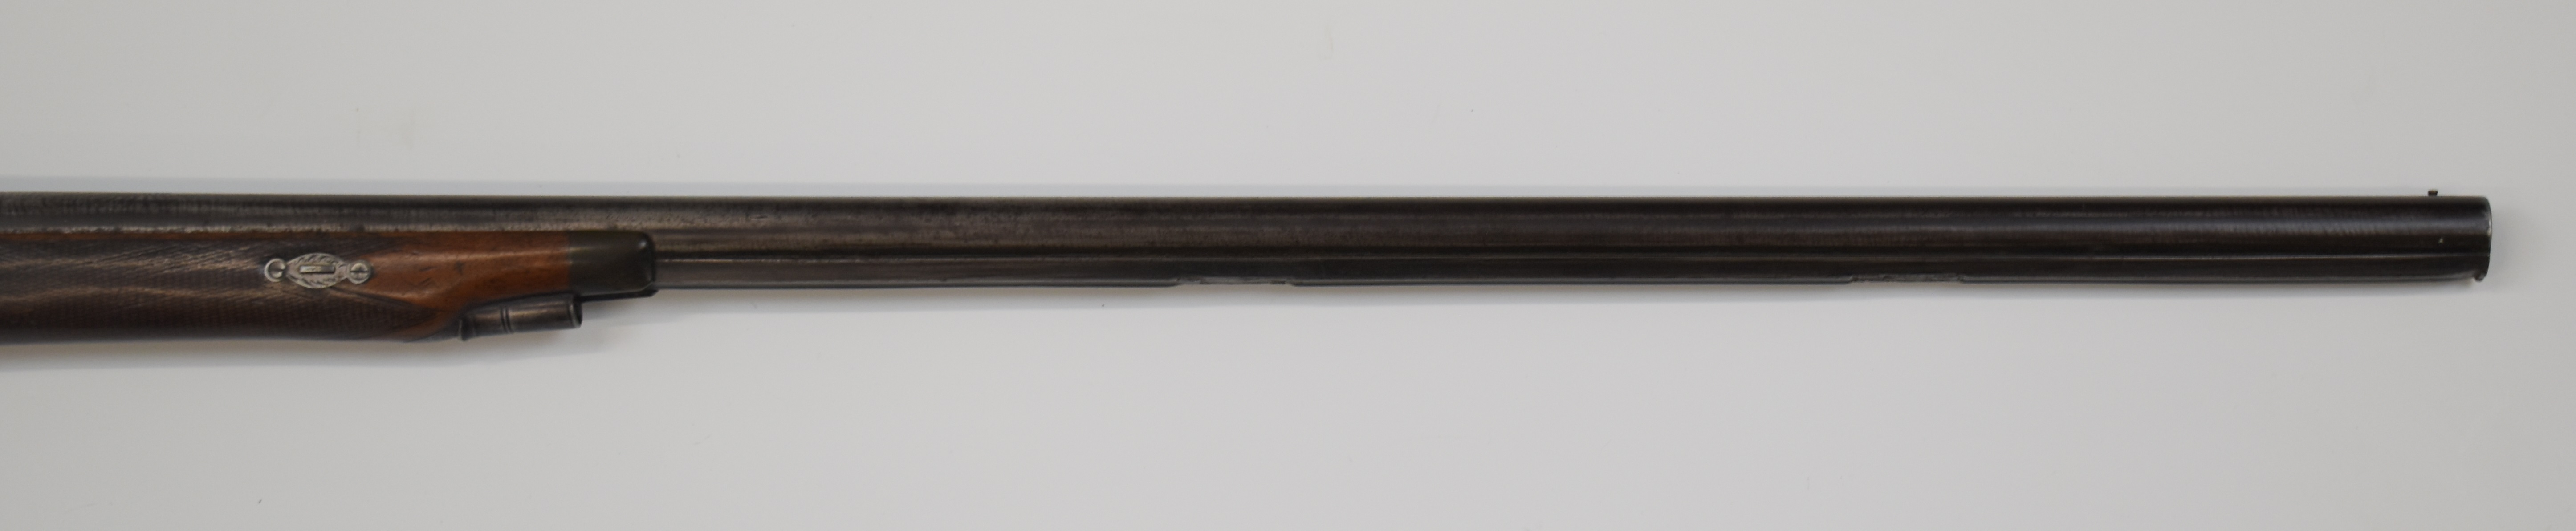 Indistinctly named 12 bore percussion hammer action muzzle loading sporting gun with engraved scenes - Image 5 of 10